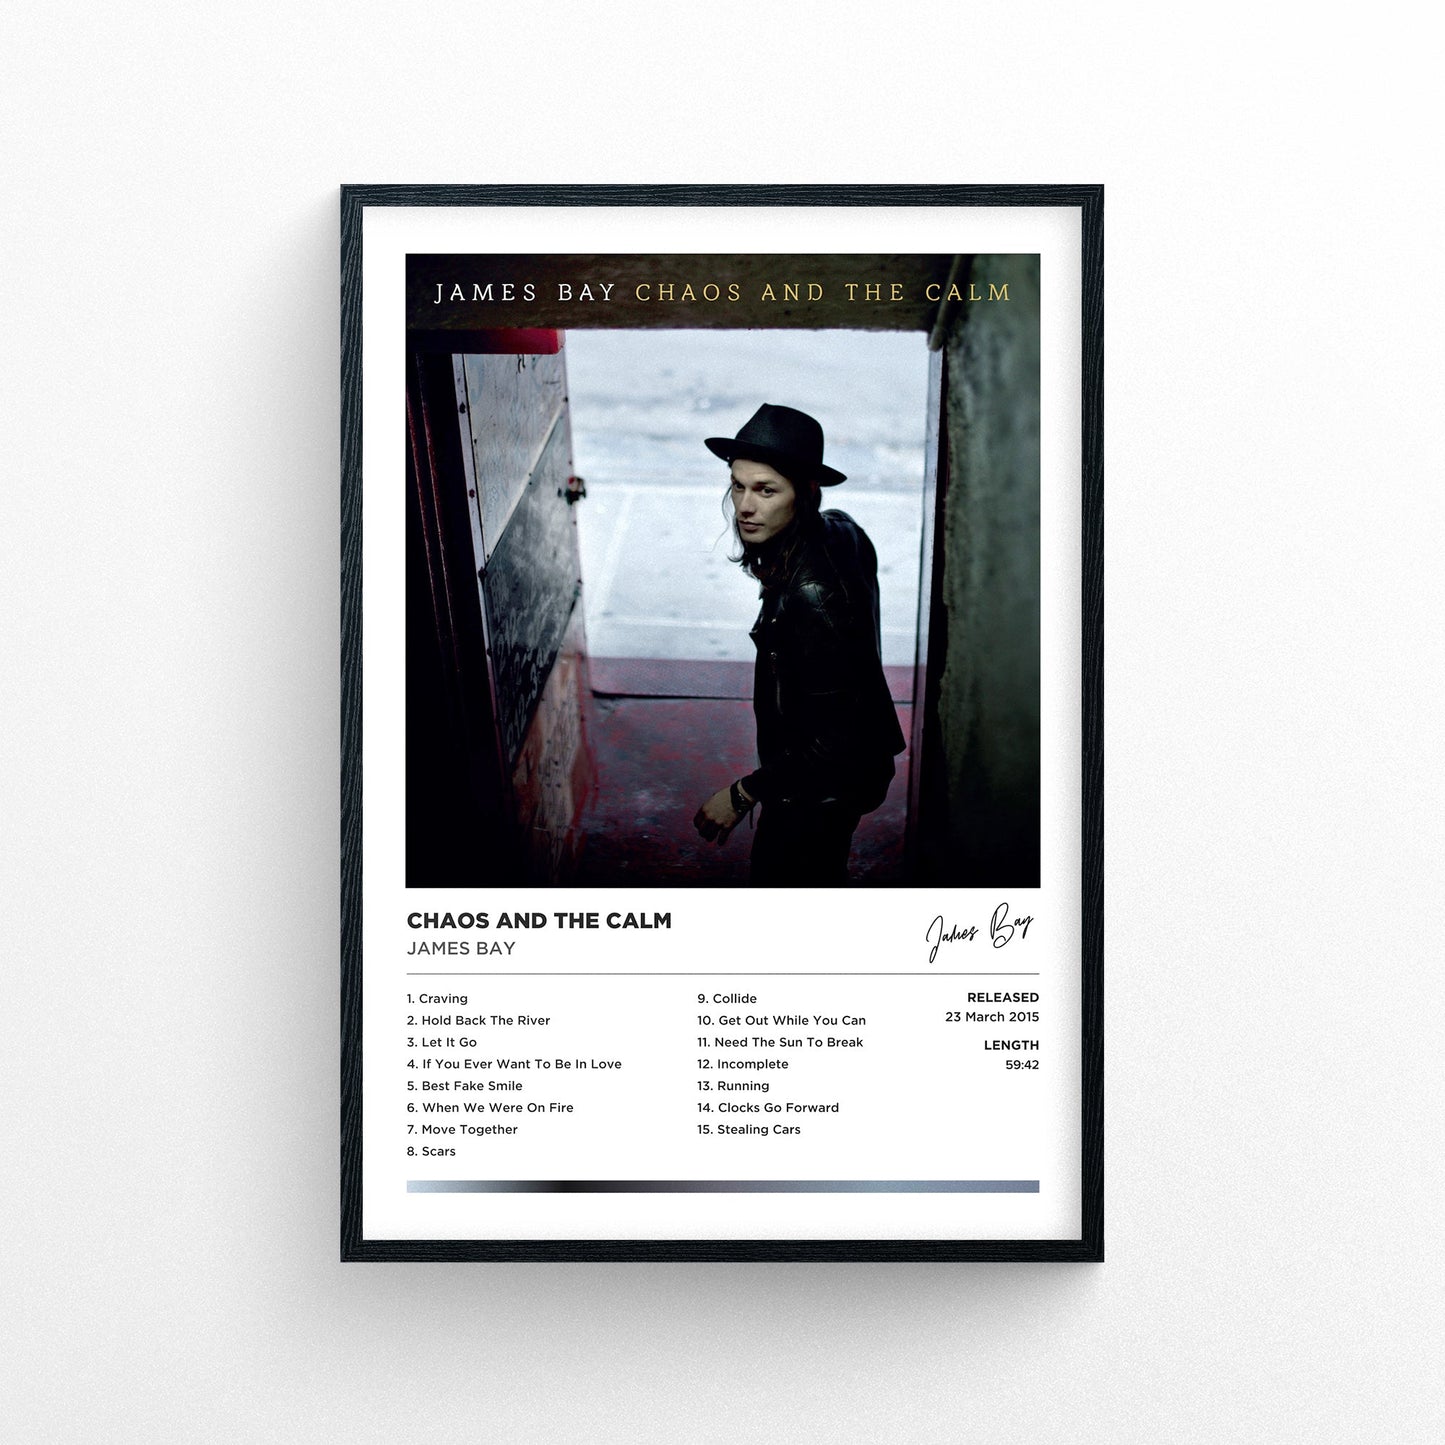 James Bay - Chaos And The Calm Framed Poster Print | Polaroid Style | Album Cover Artwork